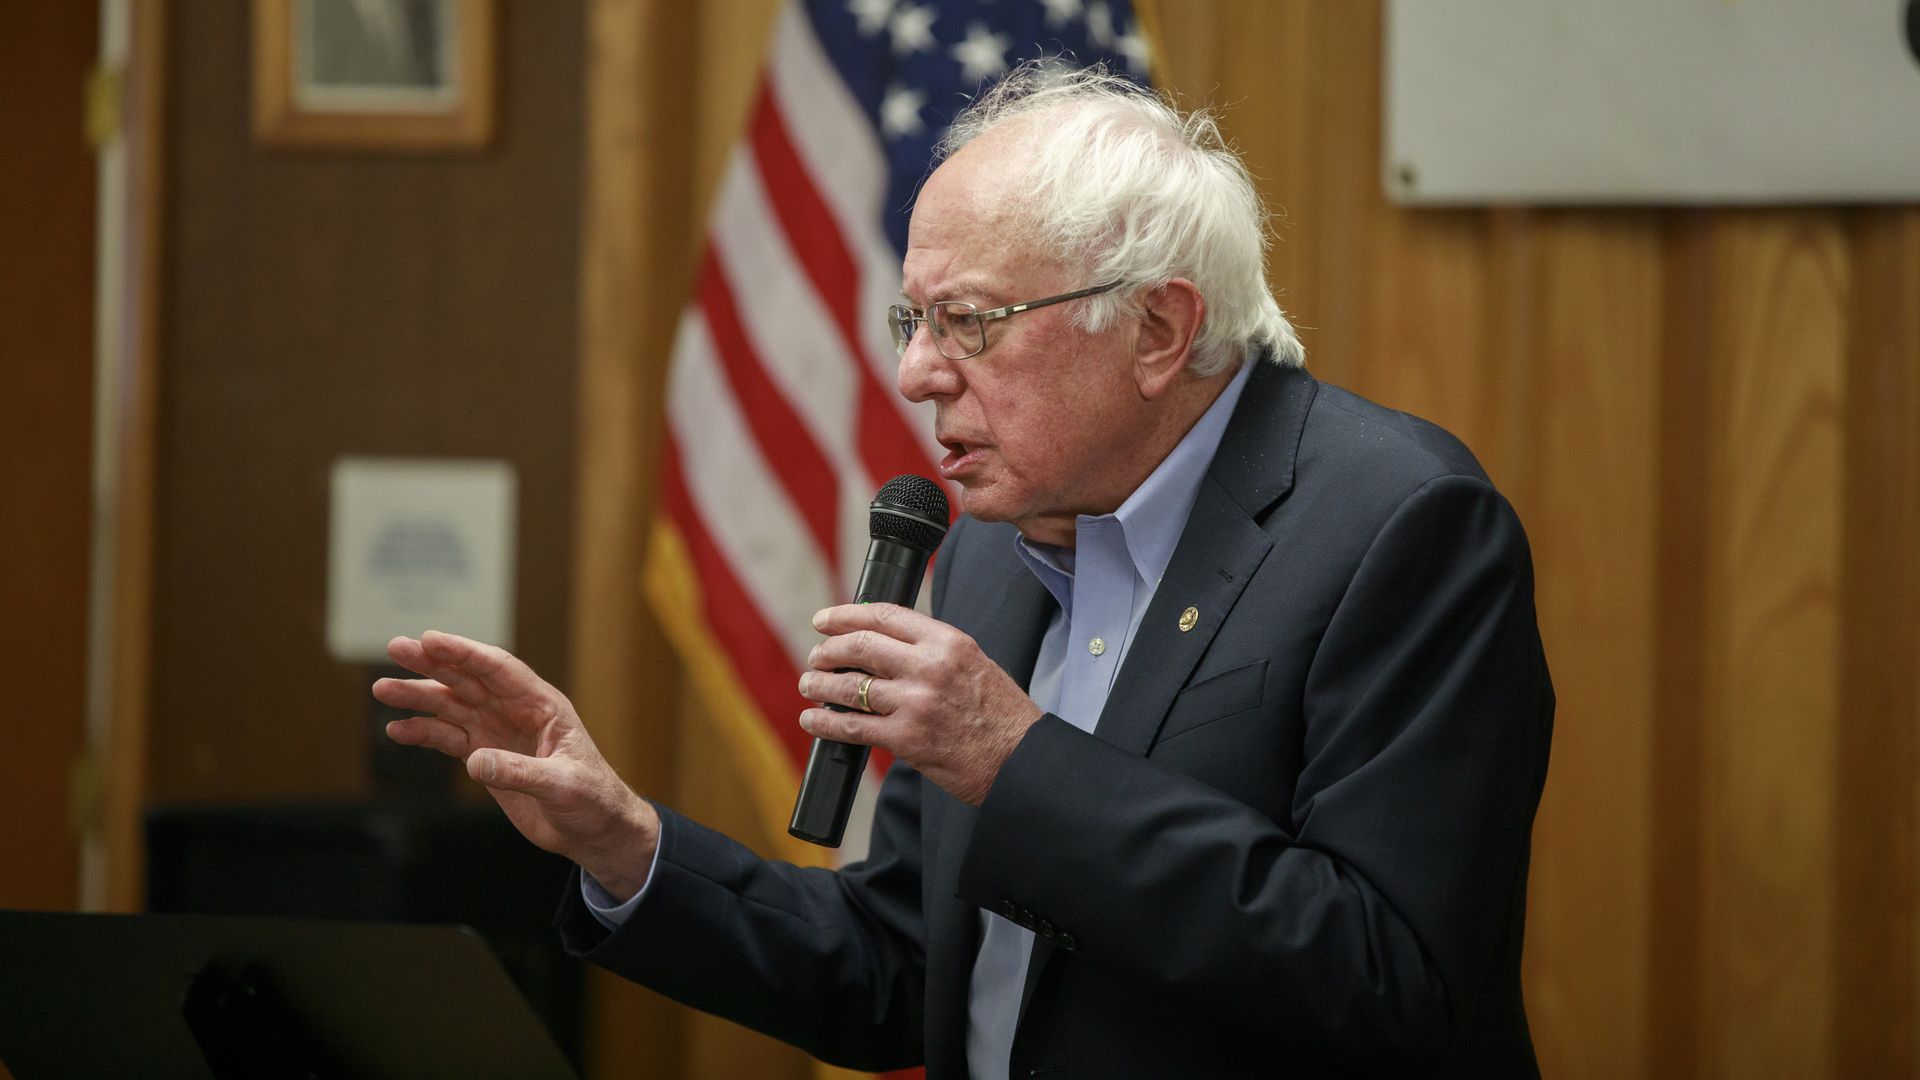 In this image, Bernie Sanders speaks into a microphone with an American flag behind him.